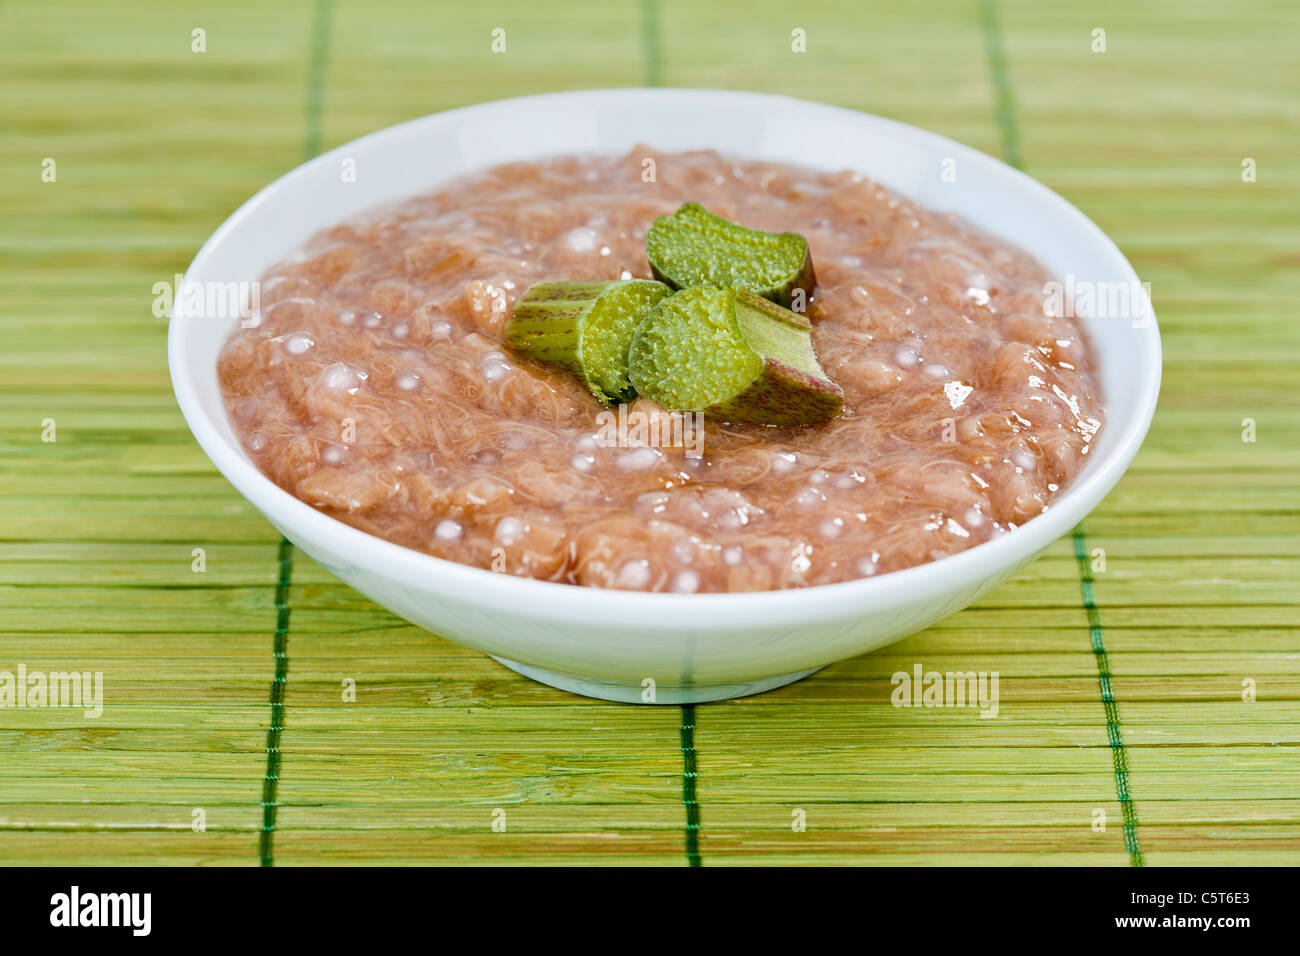 Rhabarber compote with sago on table mat Stock Photo